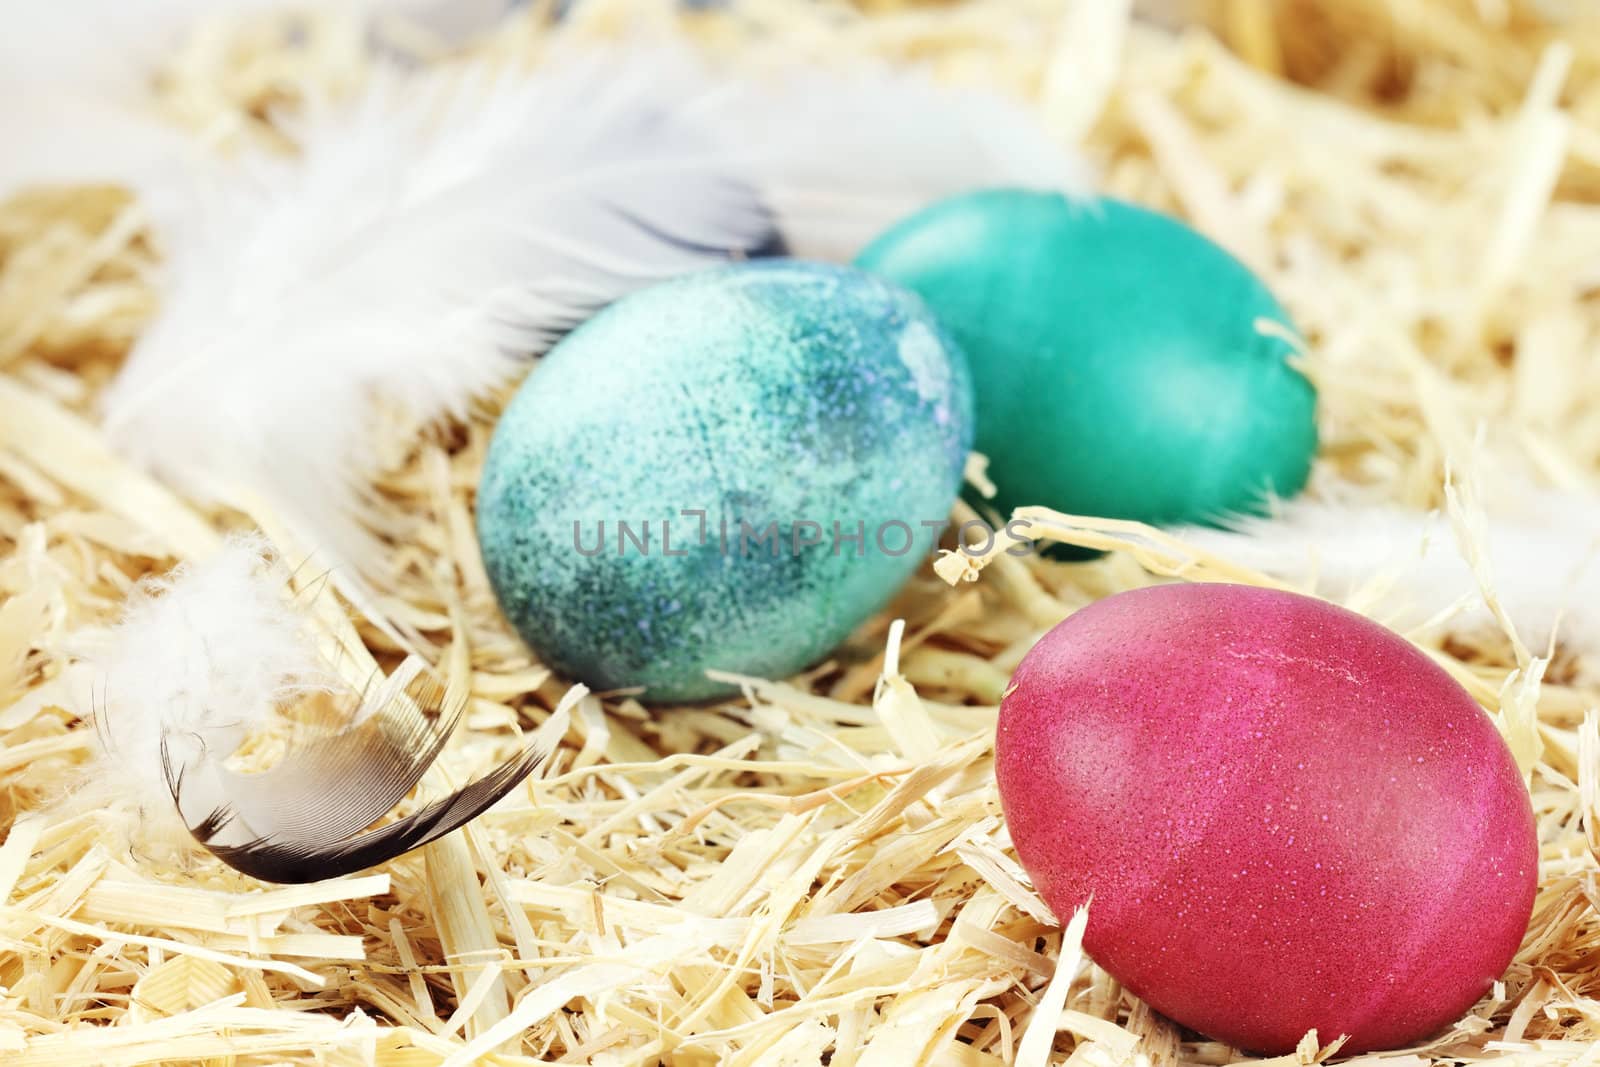 Three colored Easter eggs hidden in straw.